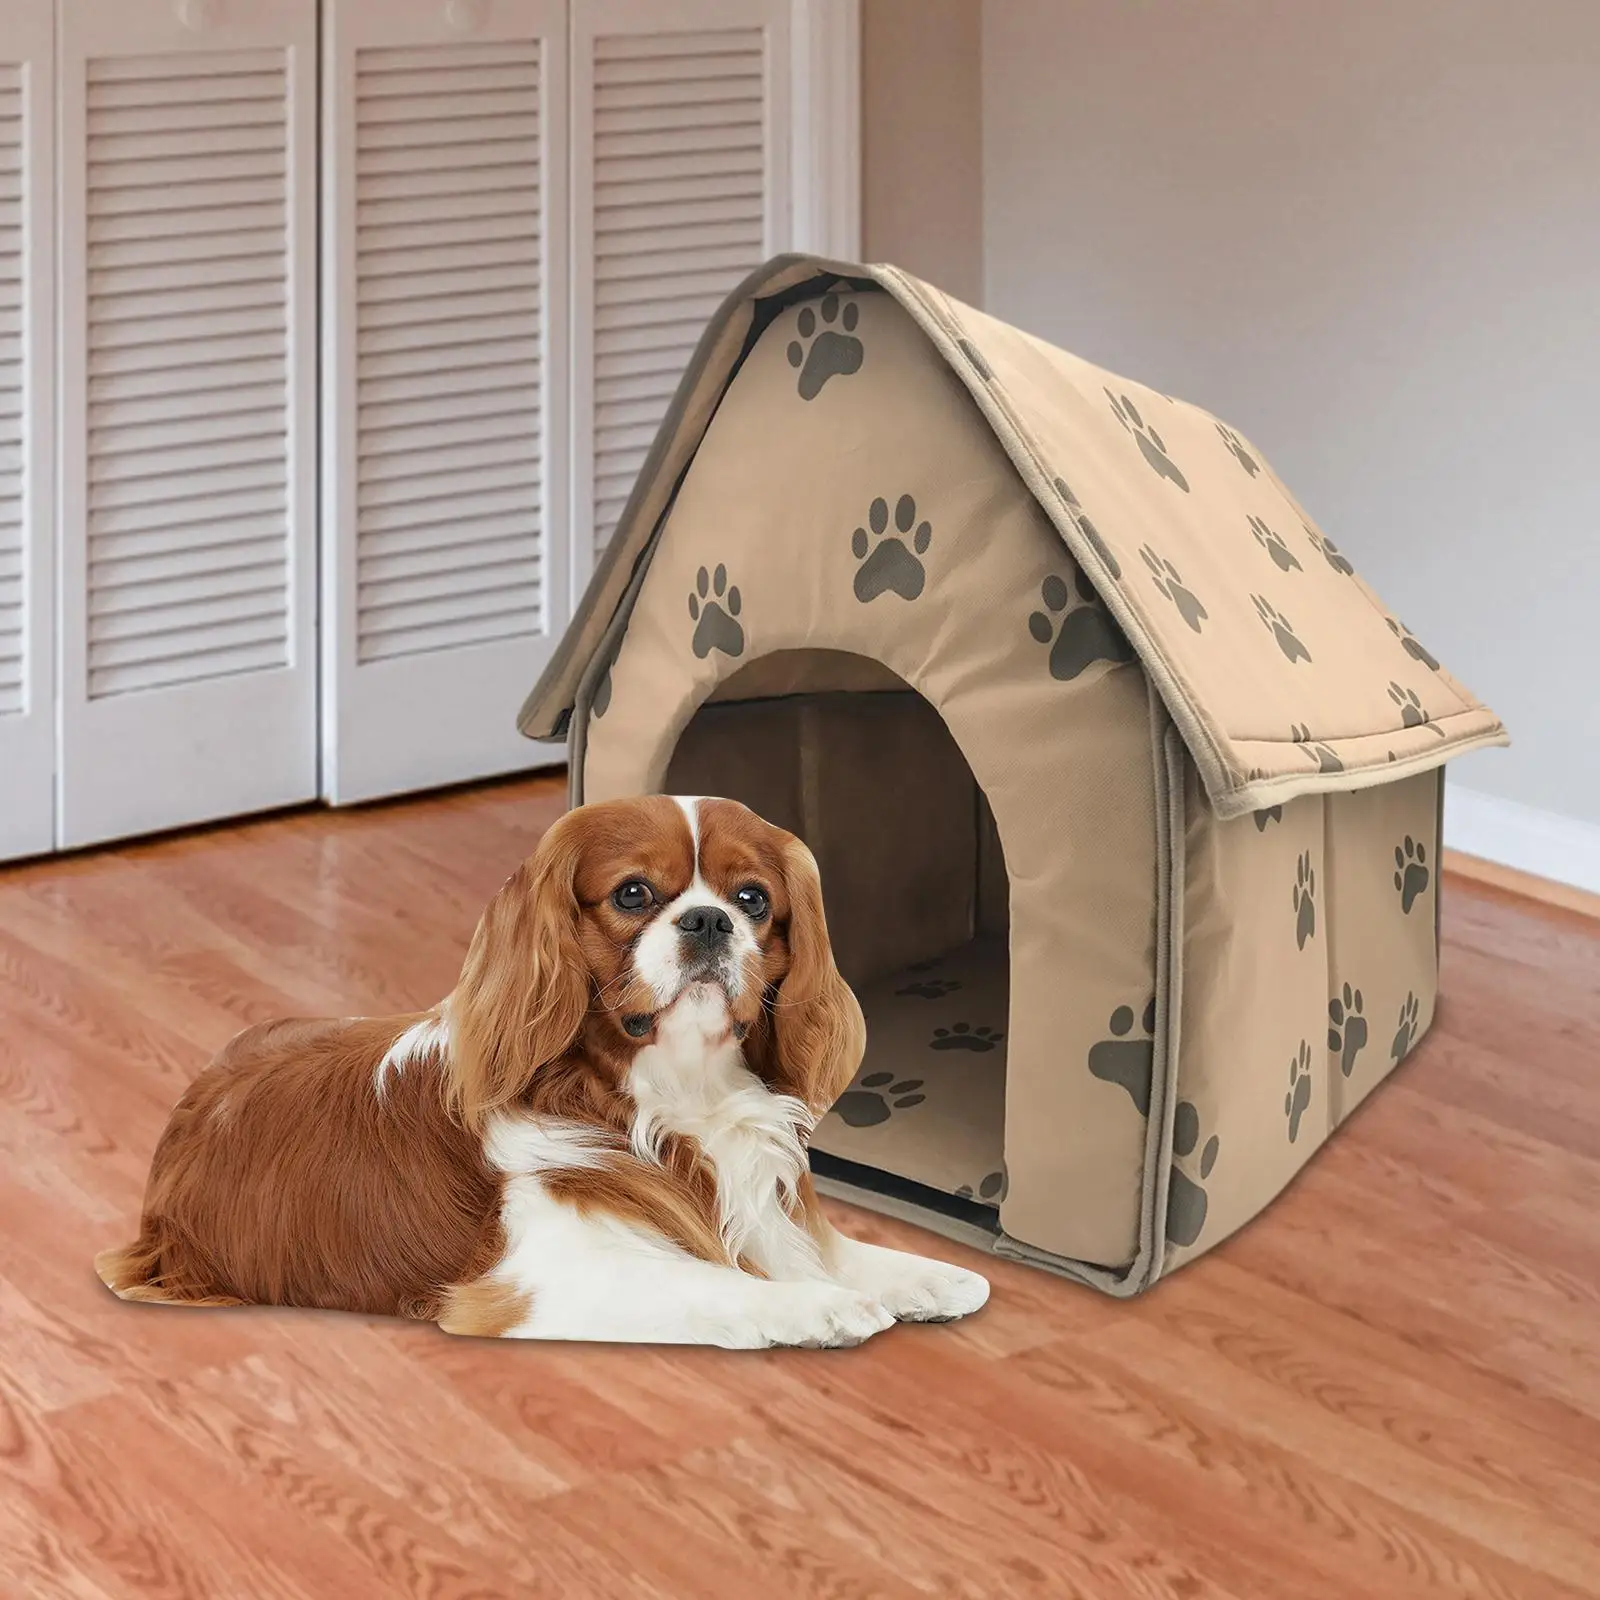 Small Footprint Pet House Anti Slip with Cushion Soft Winter Warm Nest Hut Basket Cave Tent Pet Cat Bed Dog Bed House